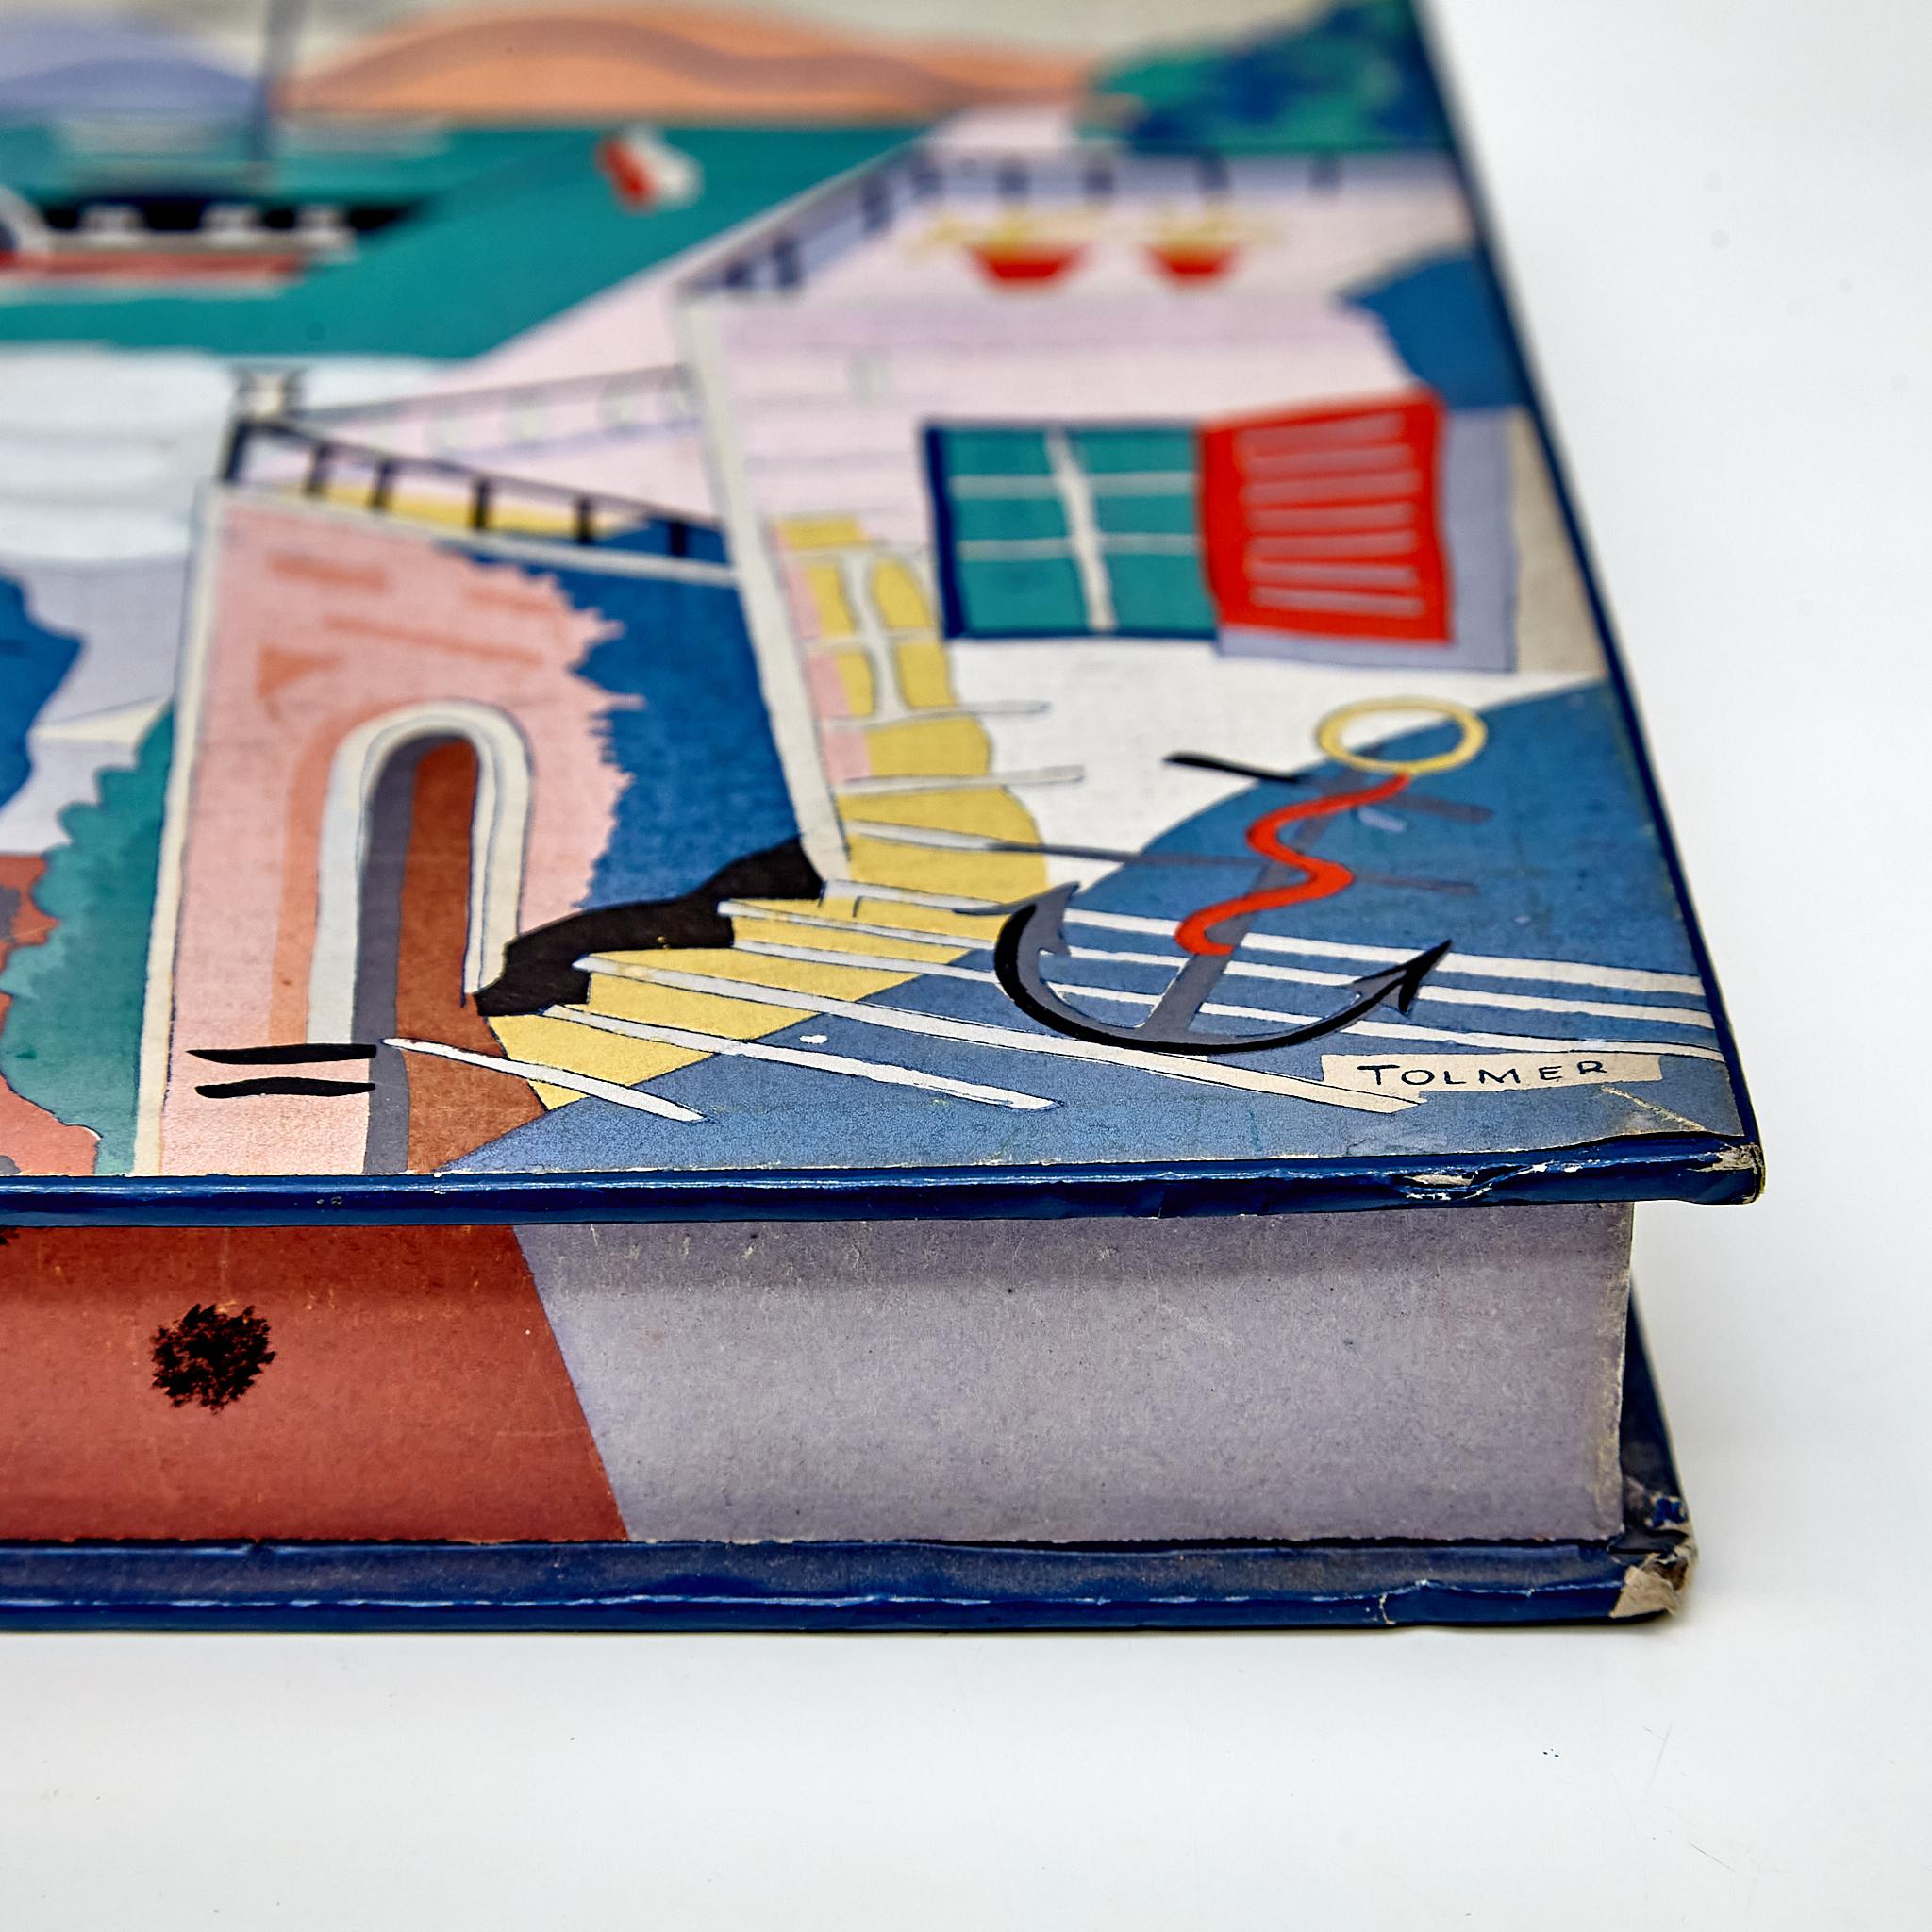 Box of Chocolates Hand-Painted by Alfred Tolmer, circa 1930 For Sale 2